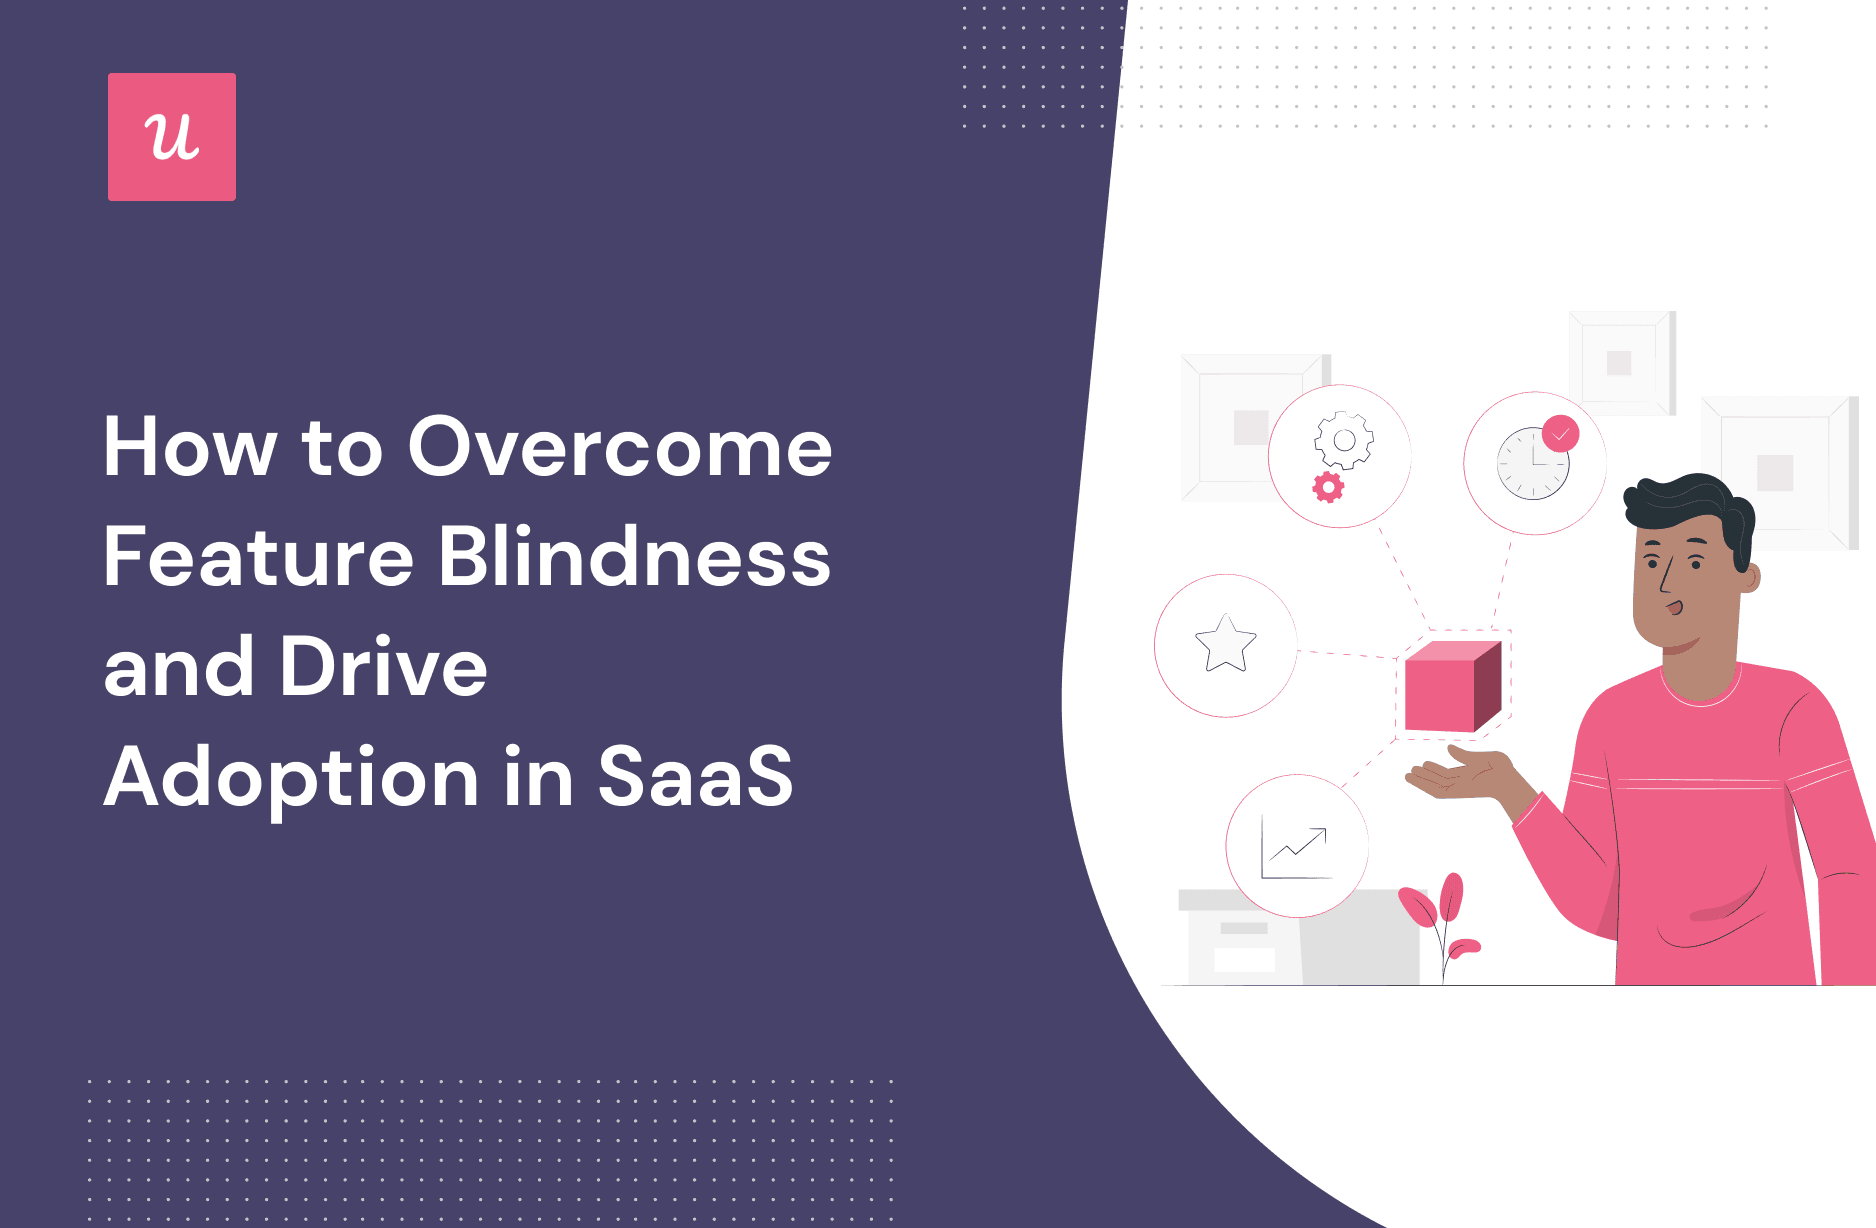 How to Overcome Feature Blindness and Drive Adoption in SaaS